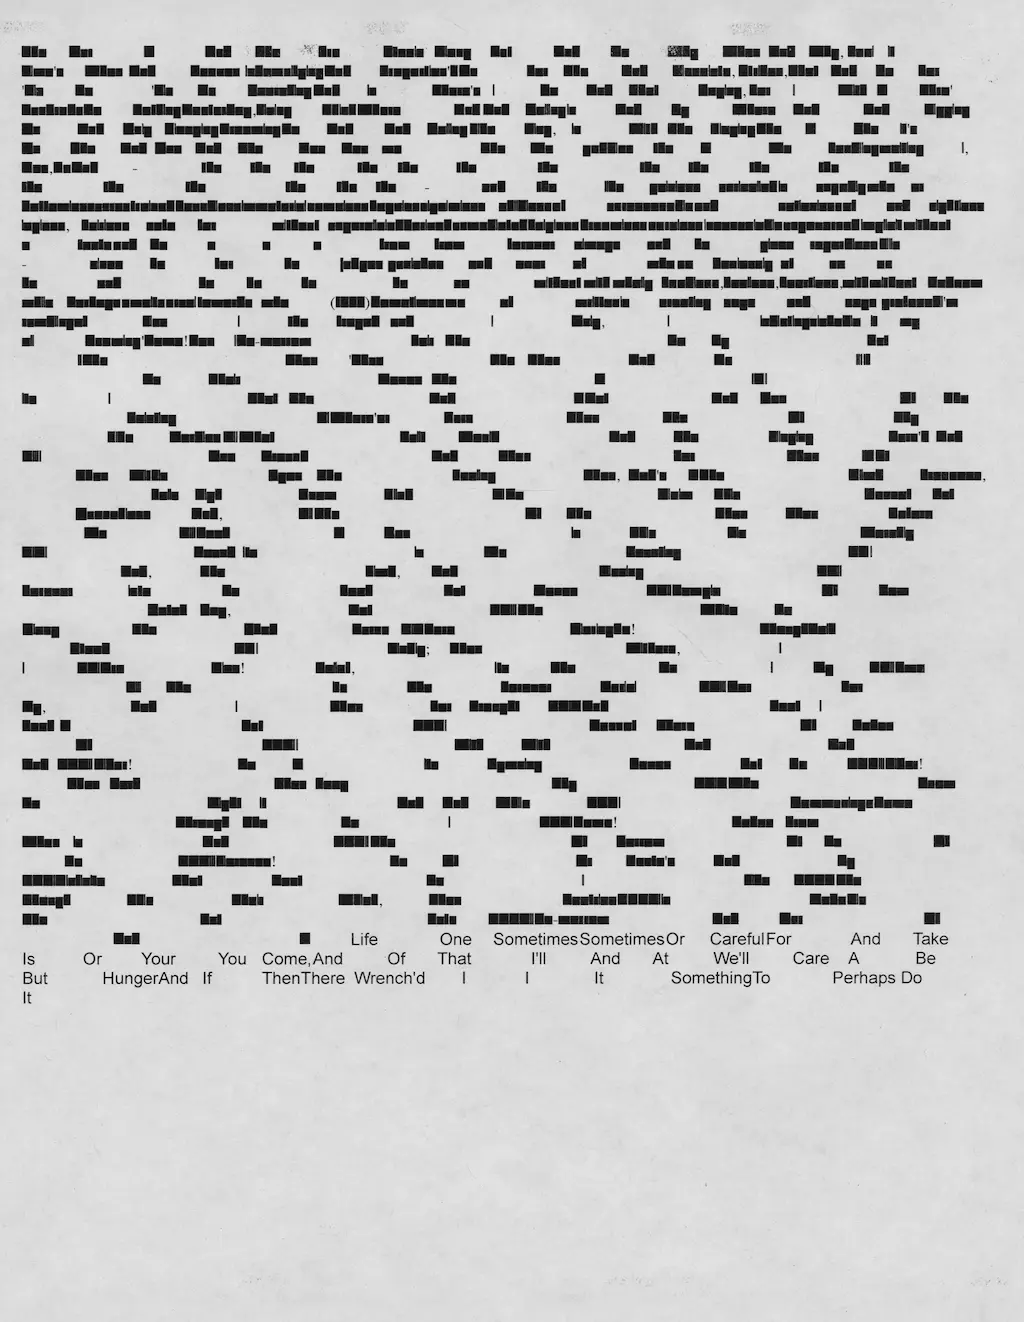 Poem generated using the Generative? Poems website, printed, and scanned.